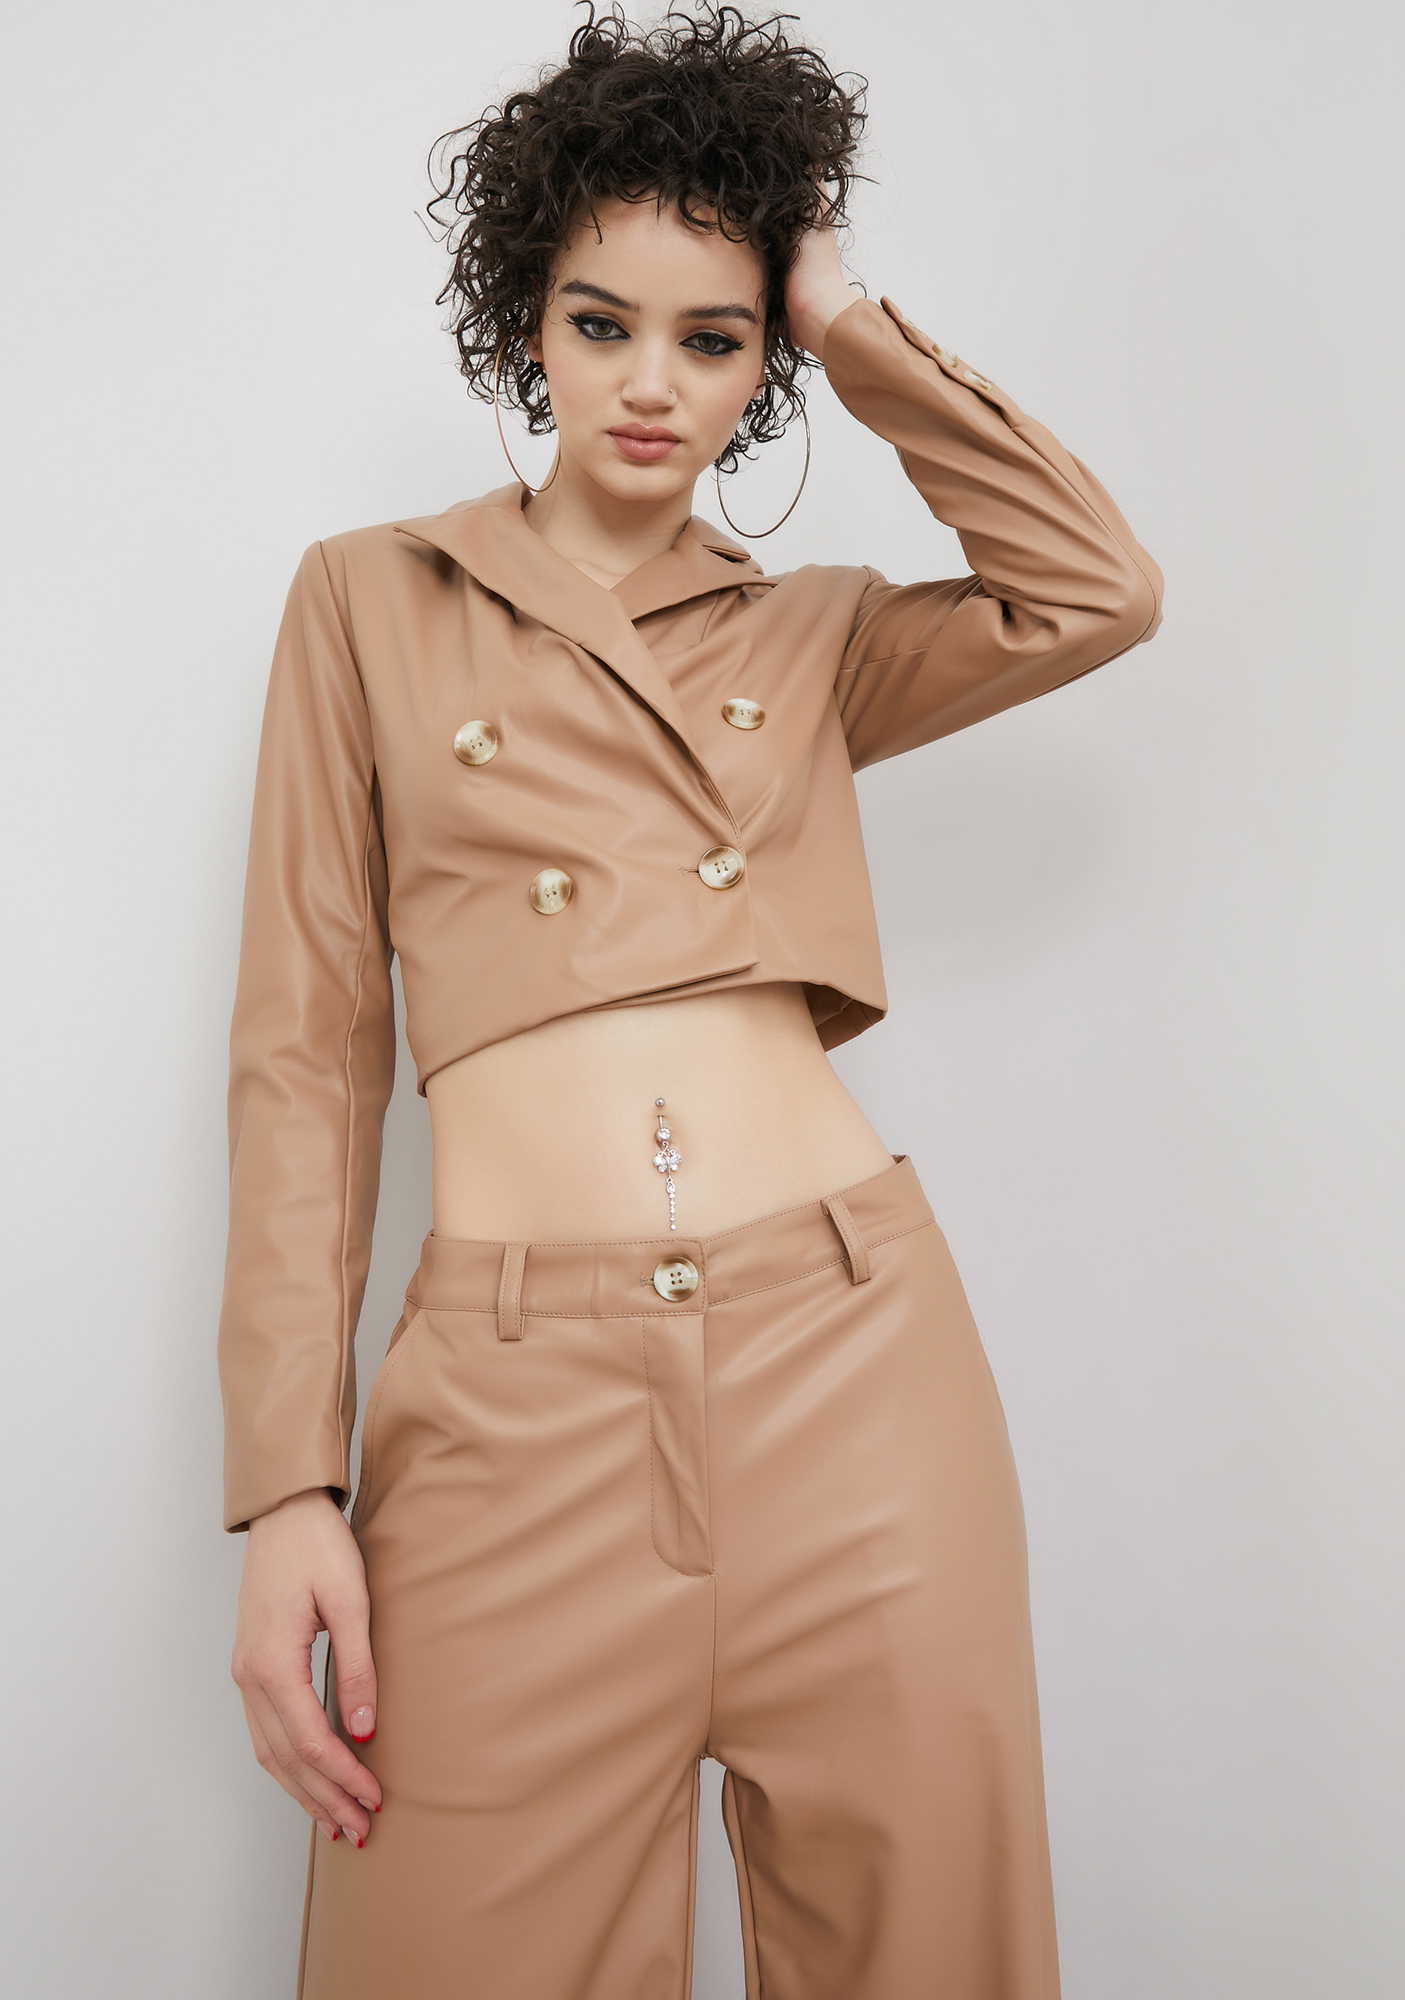 Vegan Leather Cropped Collared Jacket - Brown | Dolls Kill